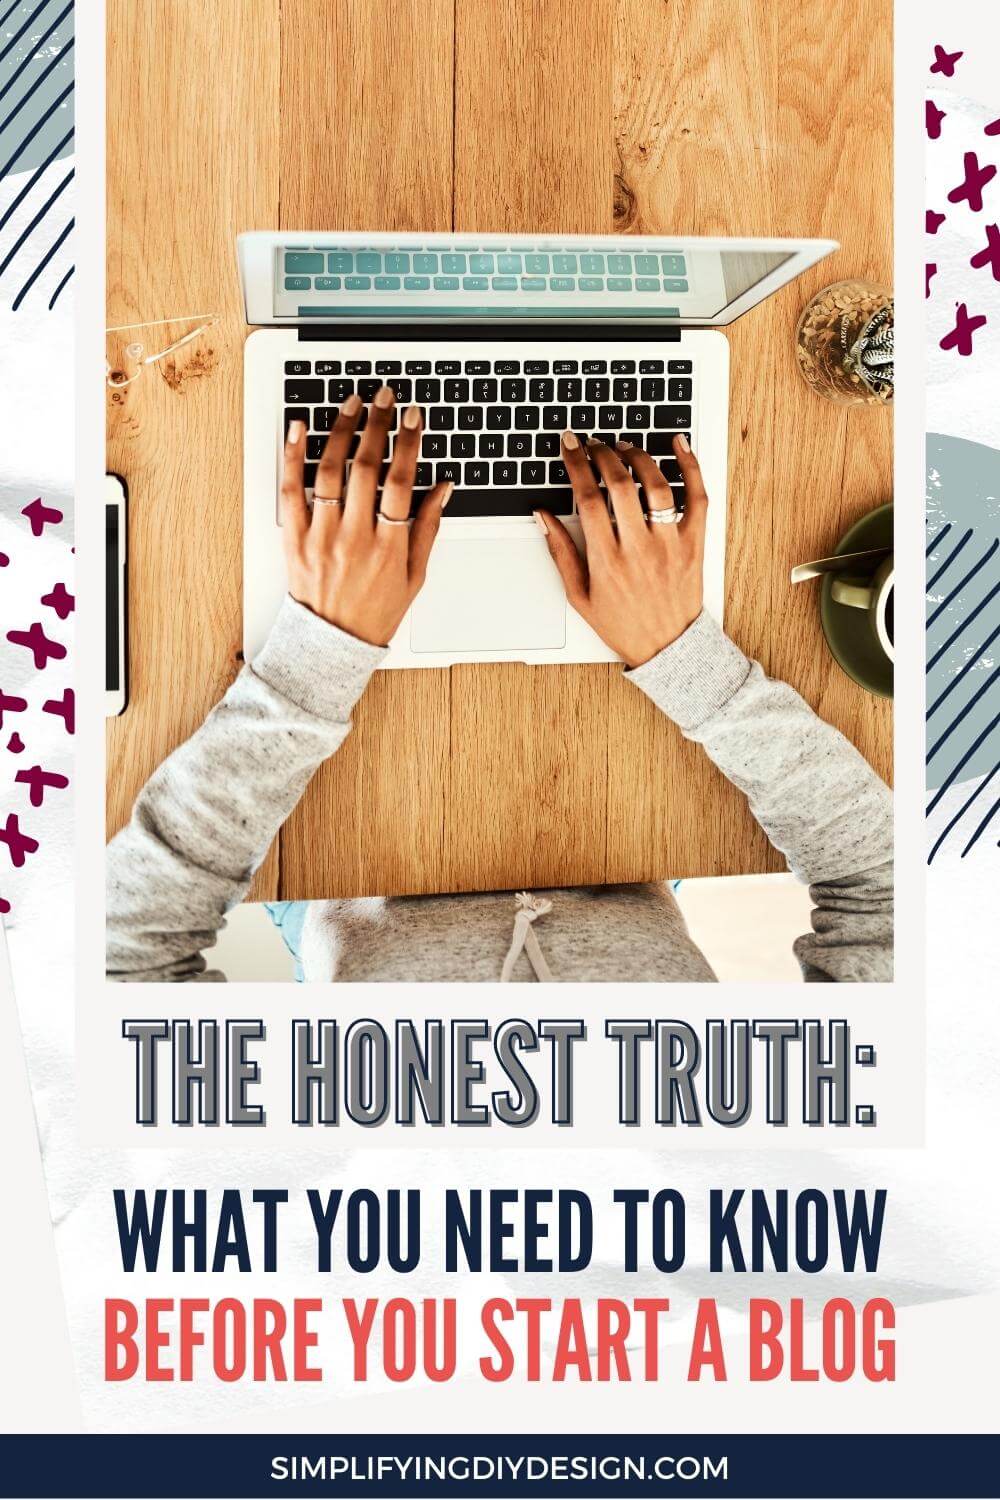 Starting a blog isn't as easy as some articles claim to be. Here's the real, honest truth about what you need to know before you start a blog.